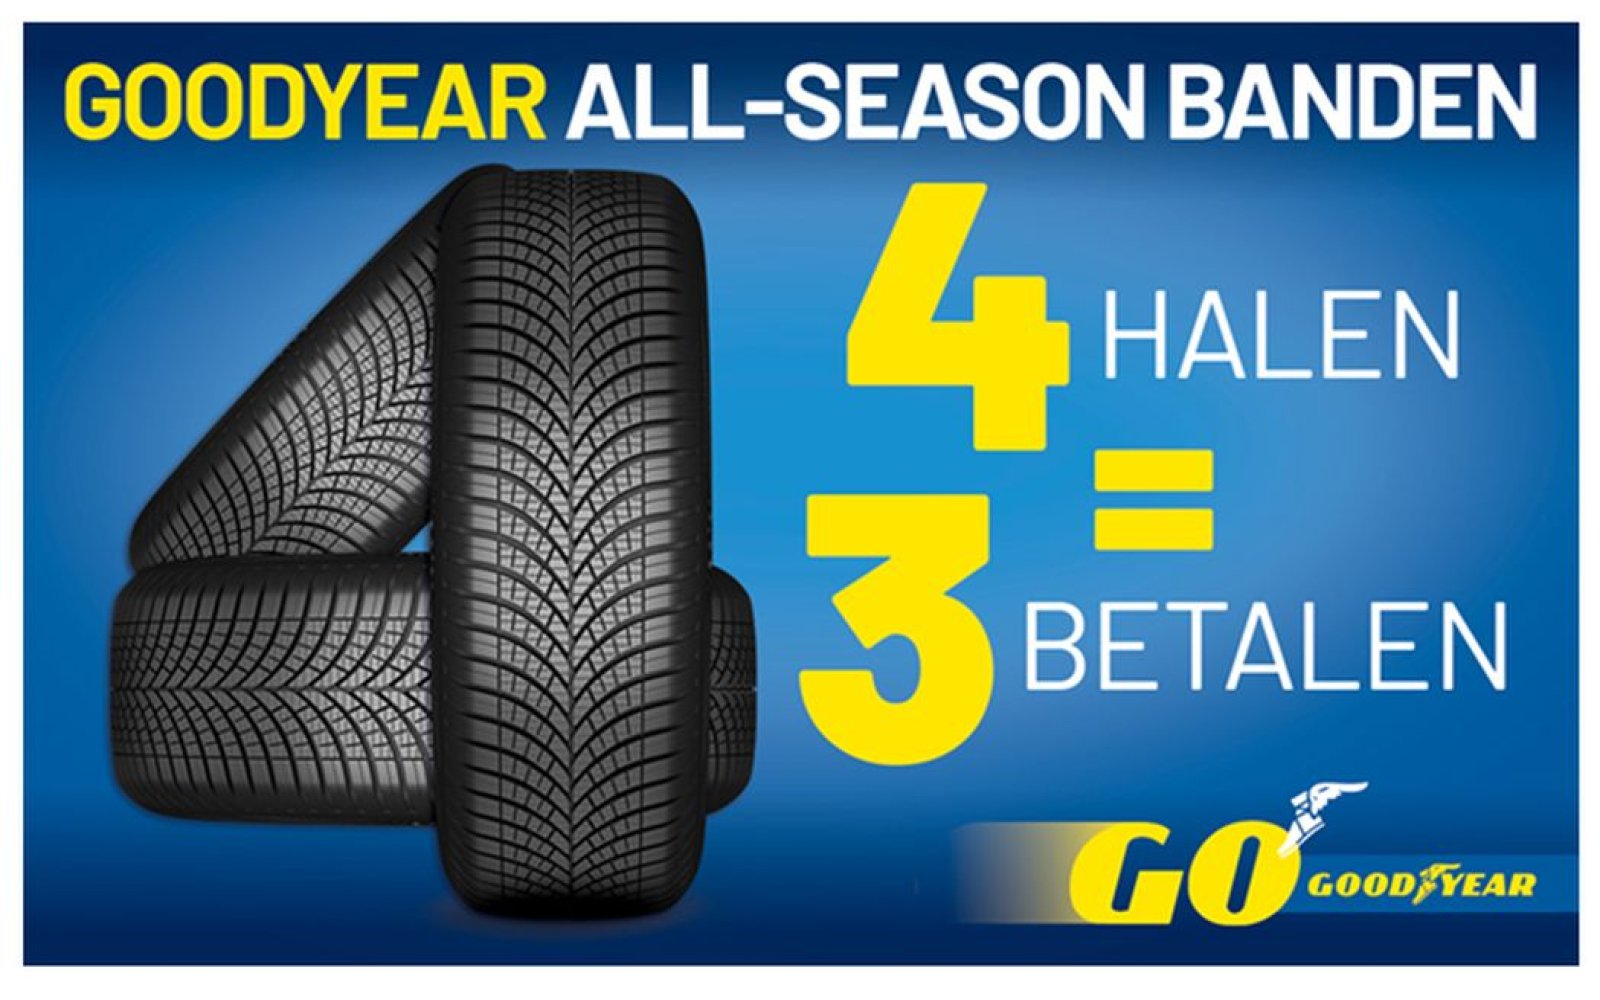 Why all season tires are so popular